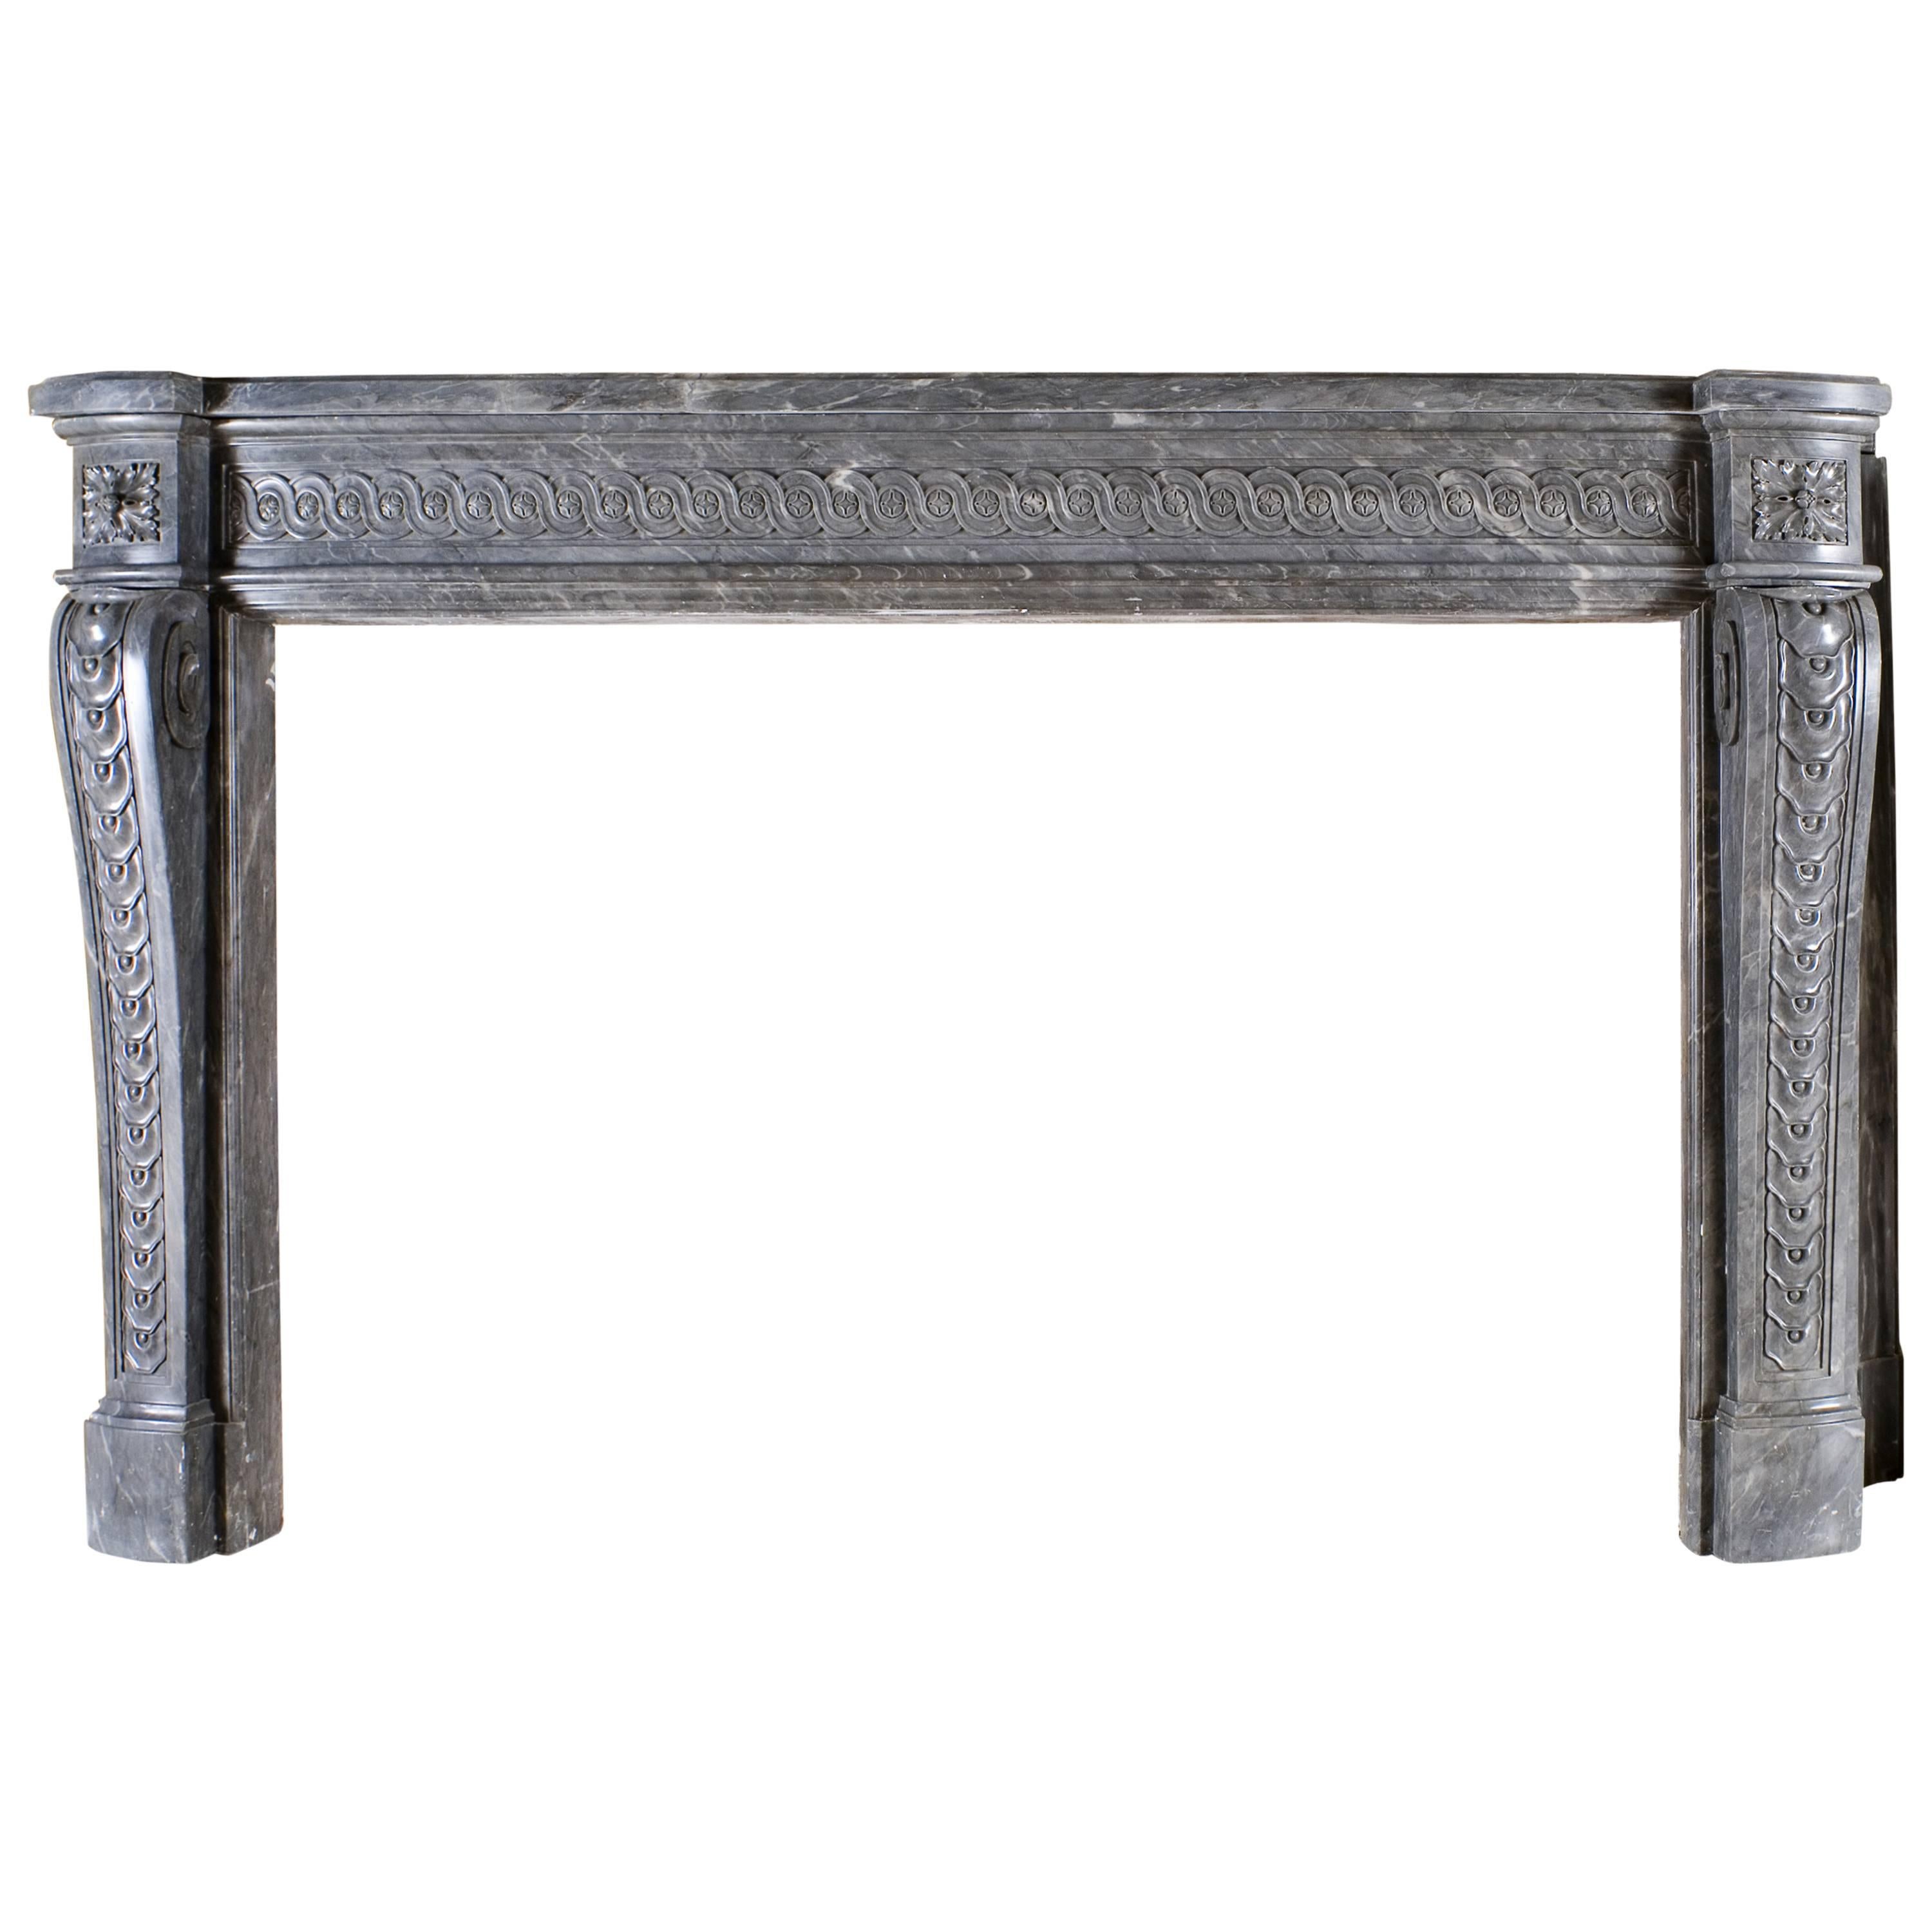 Beautiful Fireplace in Grey Marble, Louis XVI Period, 18th Century For Sale